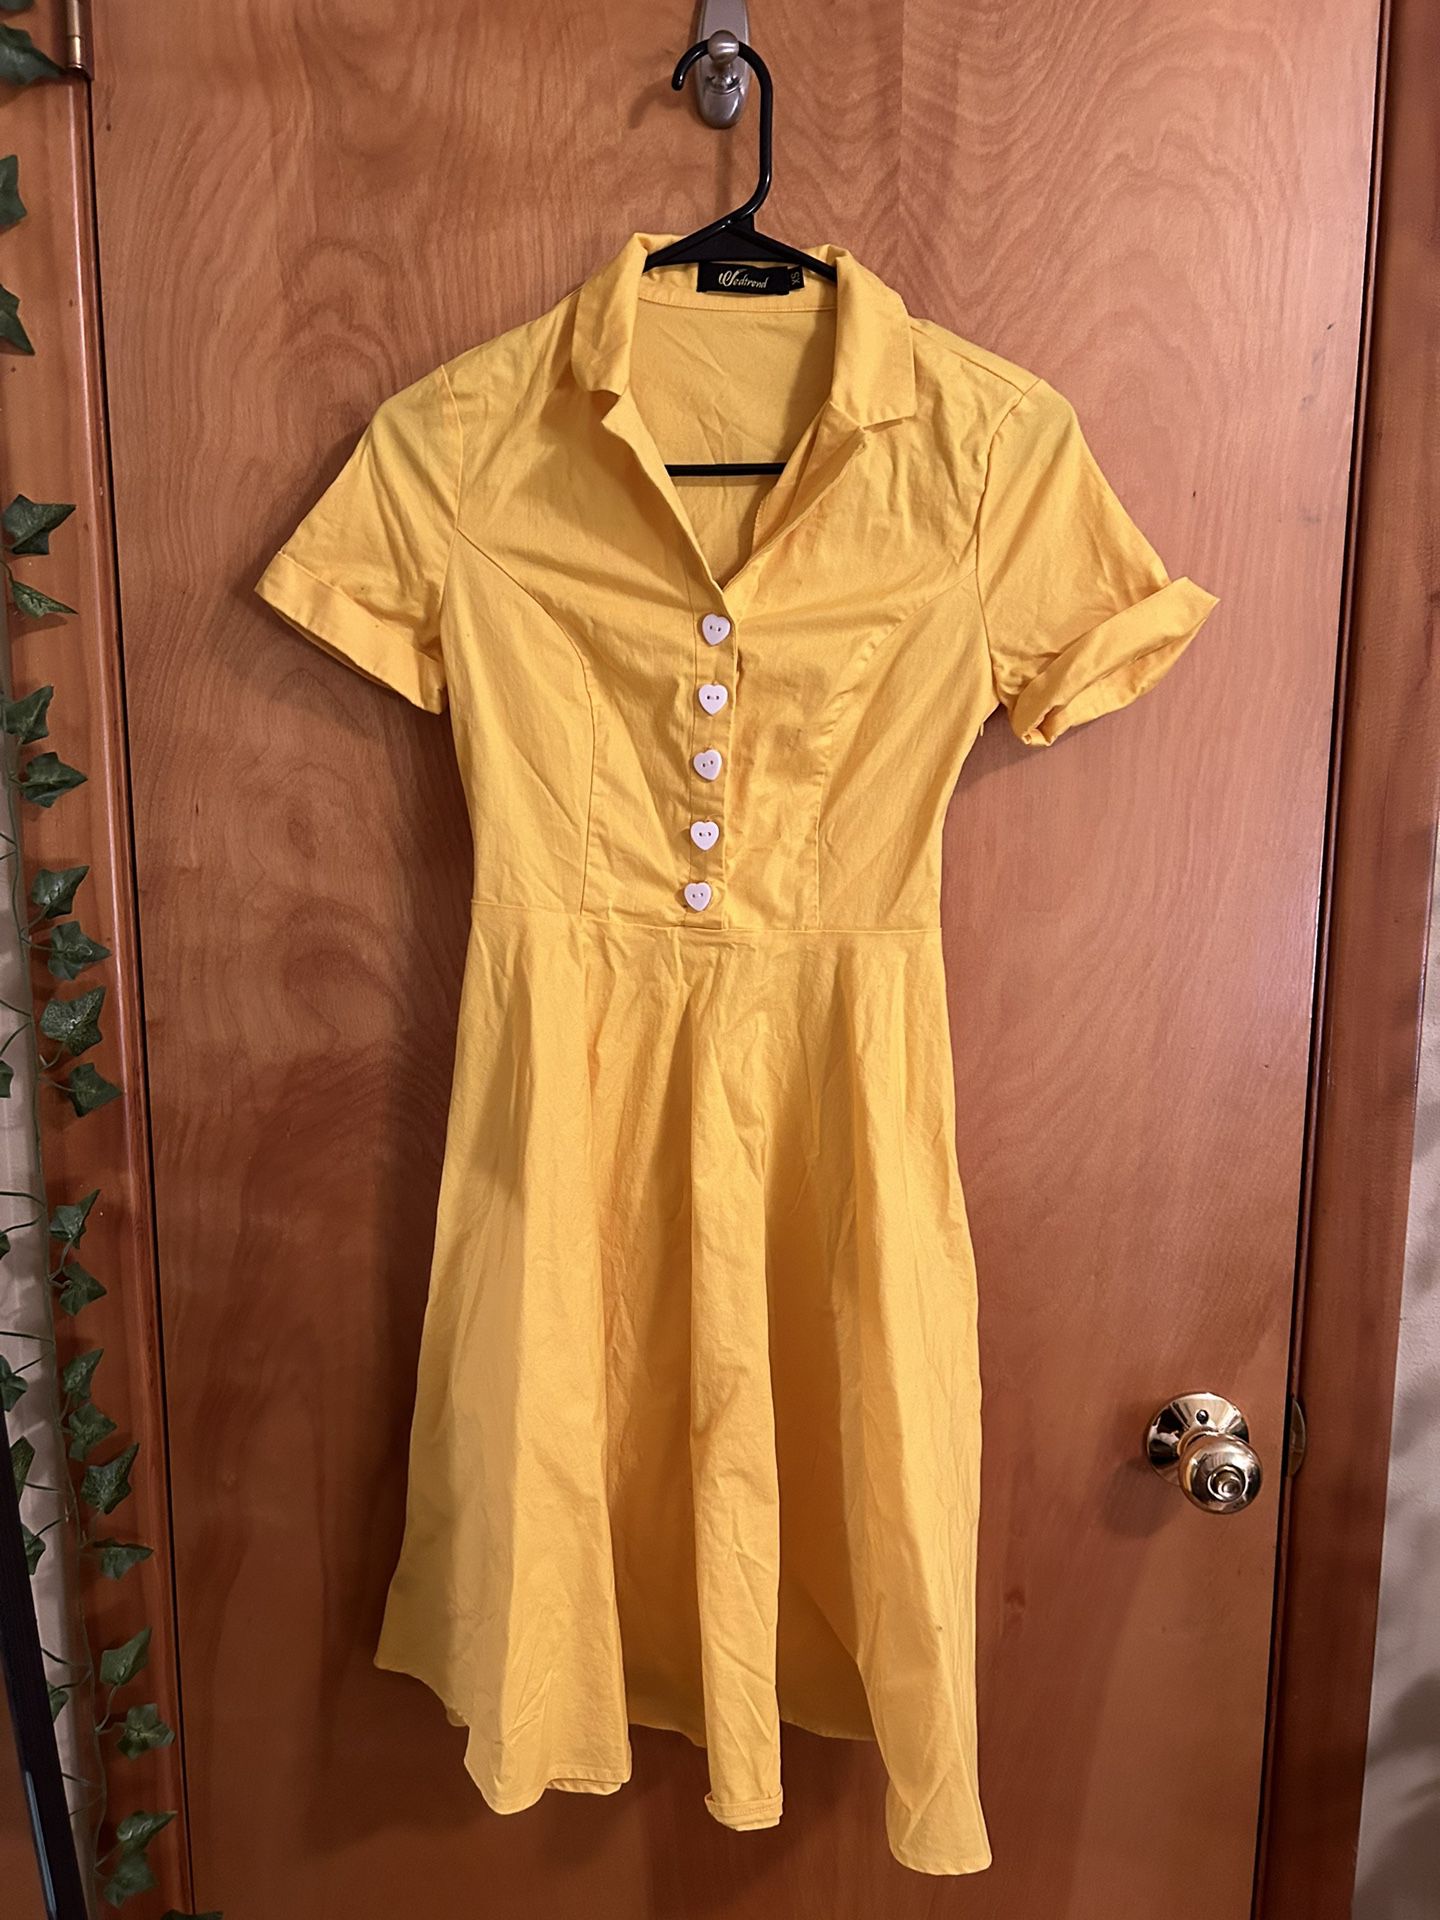 Vintage 50s Style Yellow Dress With Heart Buttons